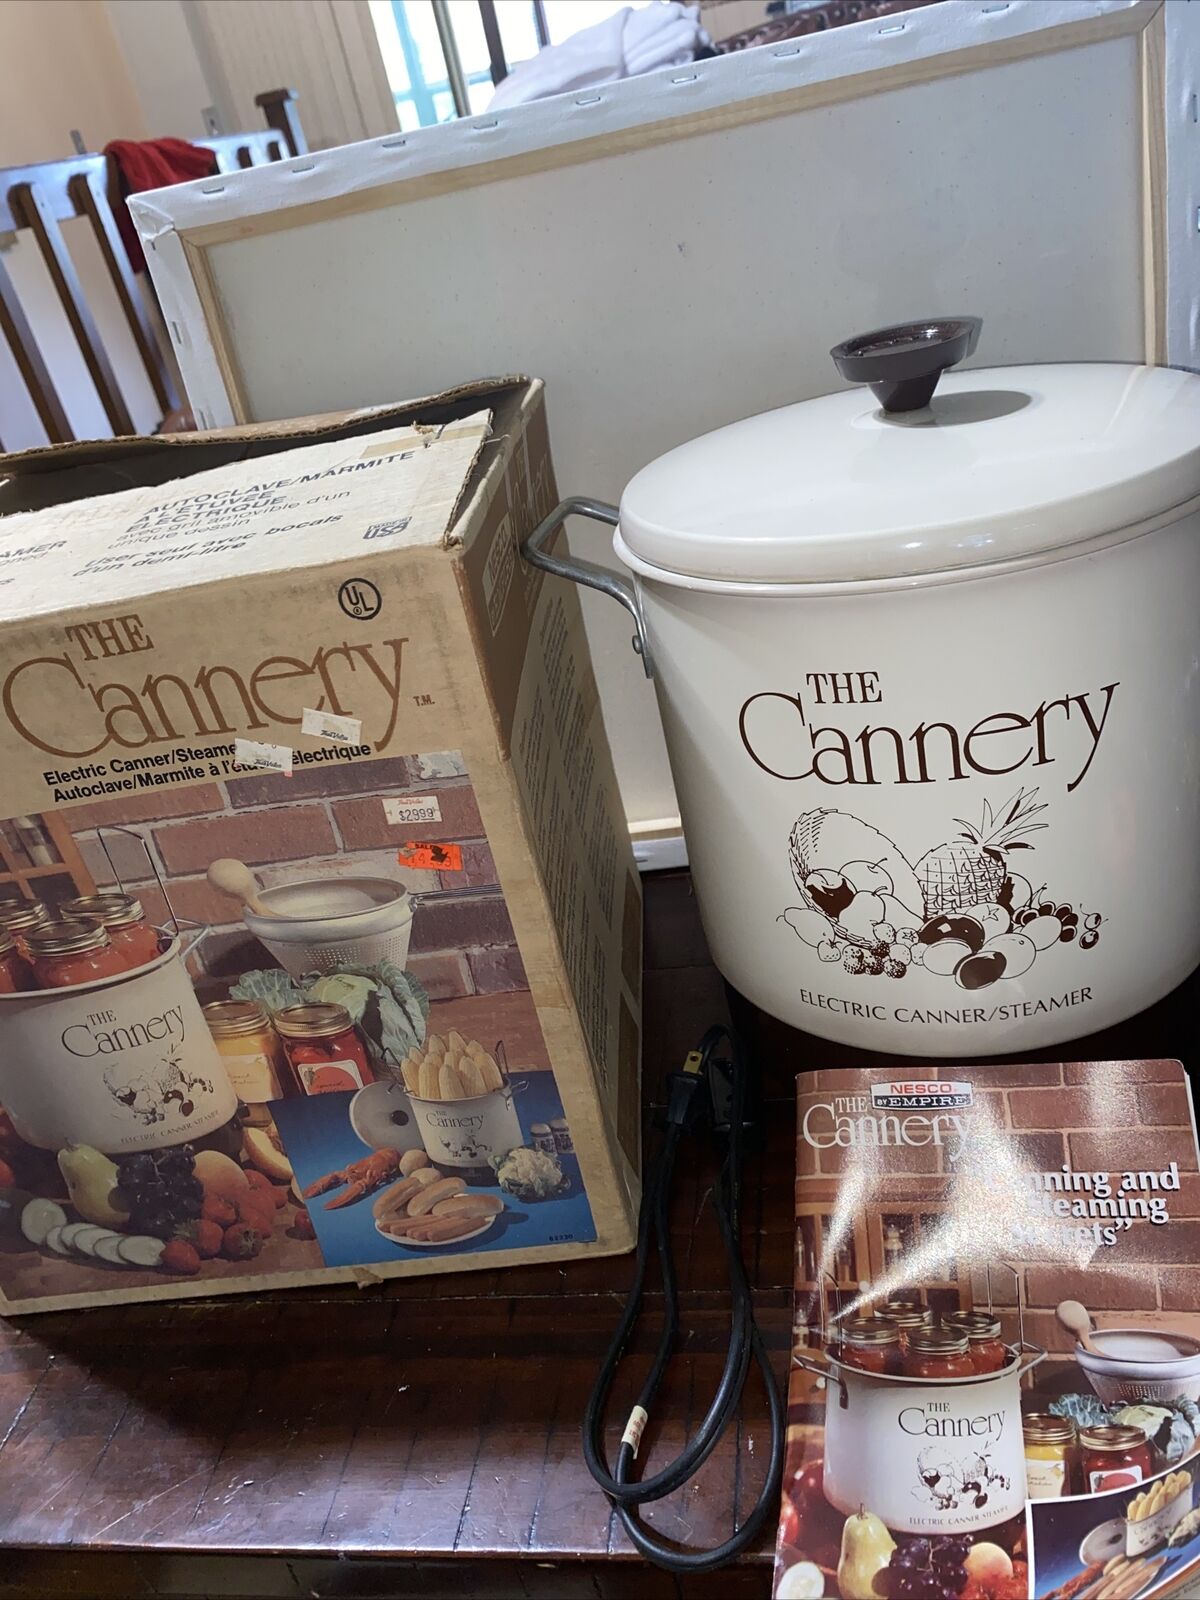 VTG Nesco The Cannery Electric Canner/Steamer for Pint Jars 4200-18 Almond Mist